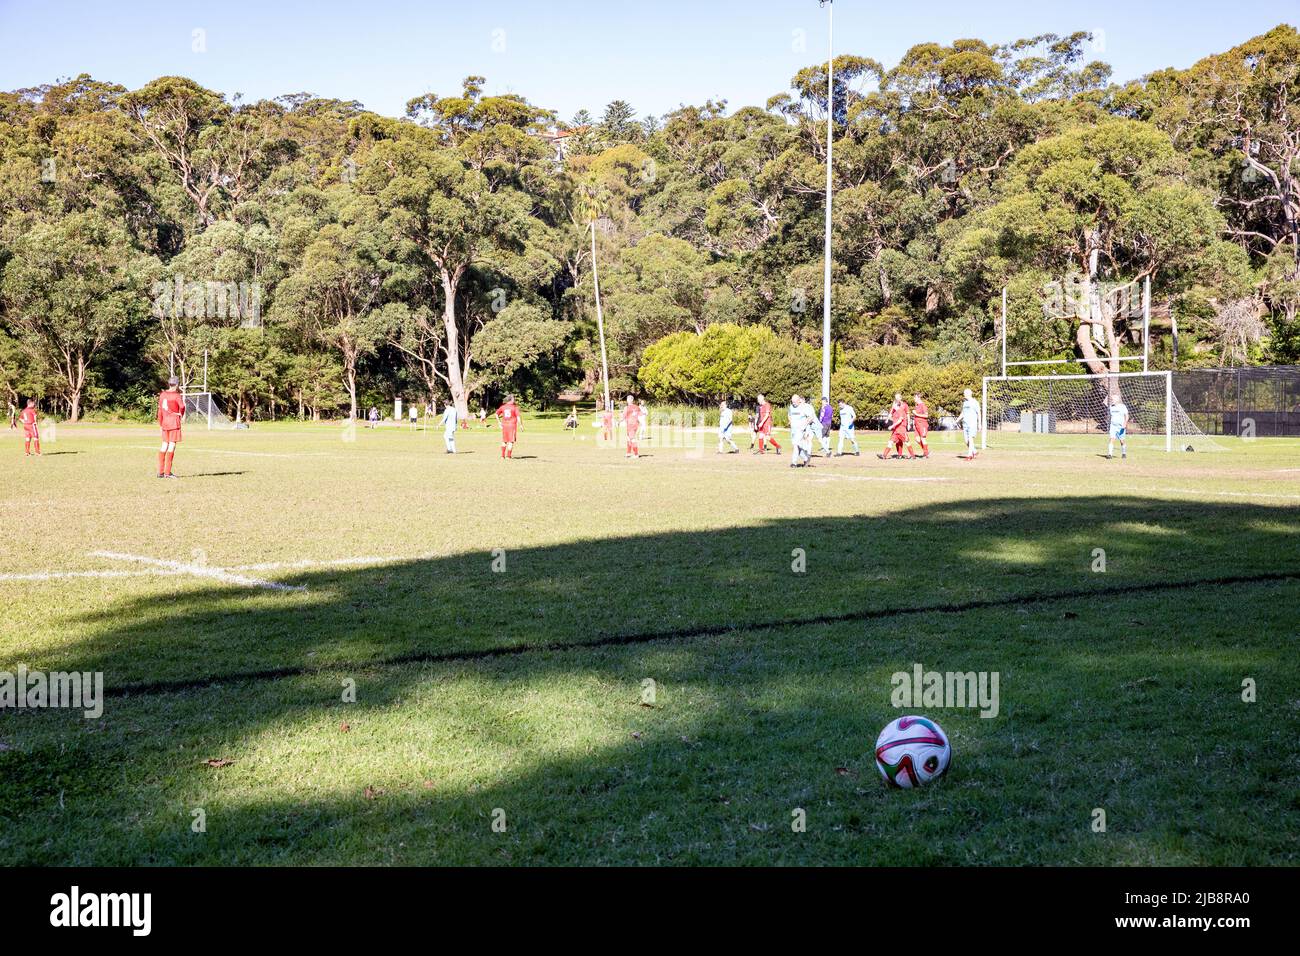 Amateur soccer football match played at Balmoral Oval in Mosman,Sydney, over 45's age group players,Australia Stock Photo